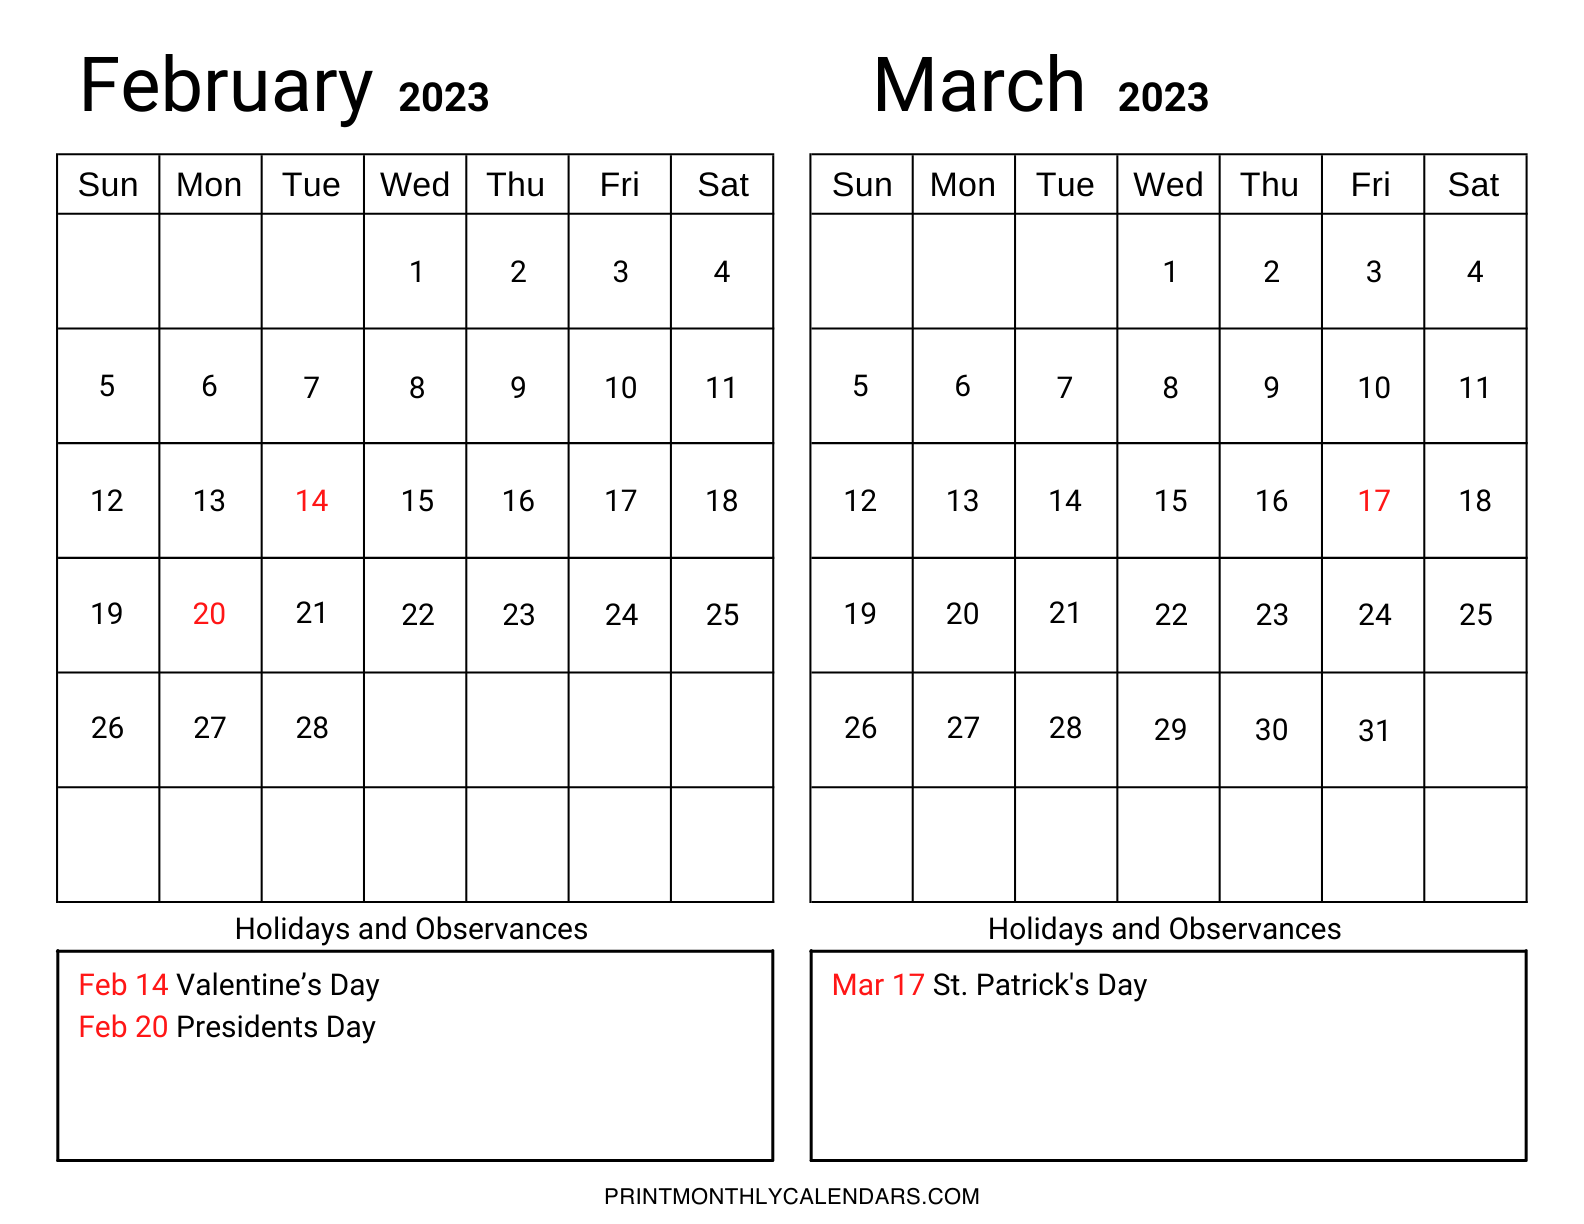 February March 2023 Calendar template with US holidays list and observances. Weekdays are starting from Sunday instead of Monday.